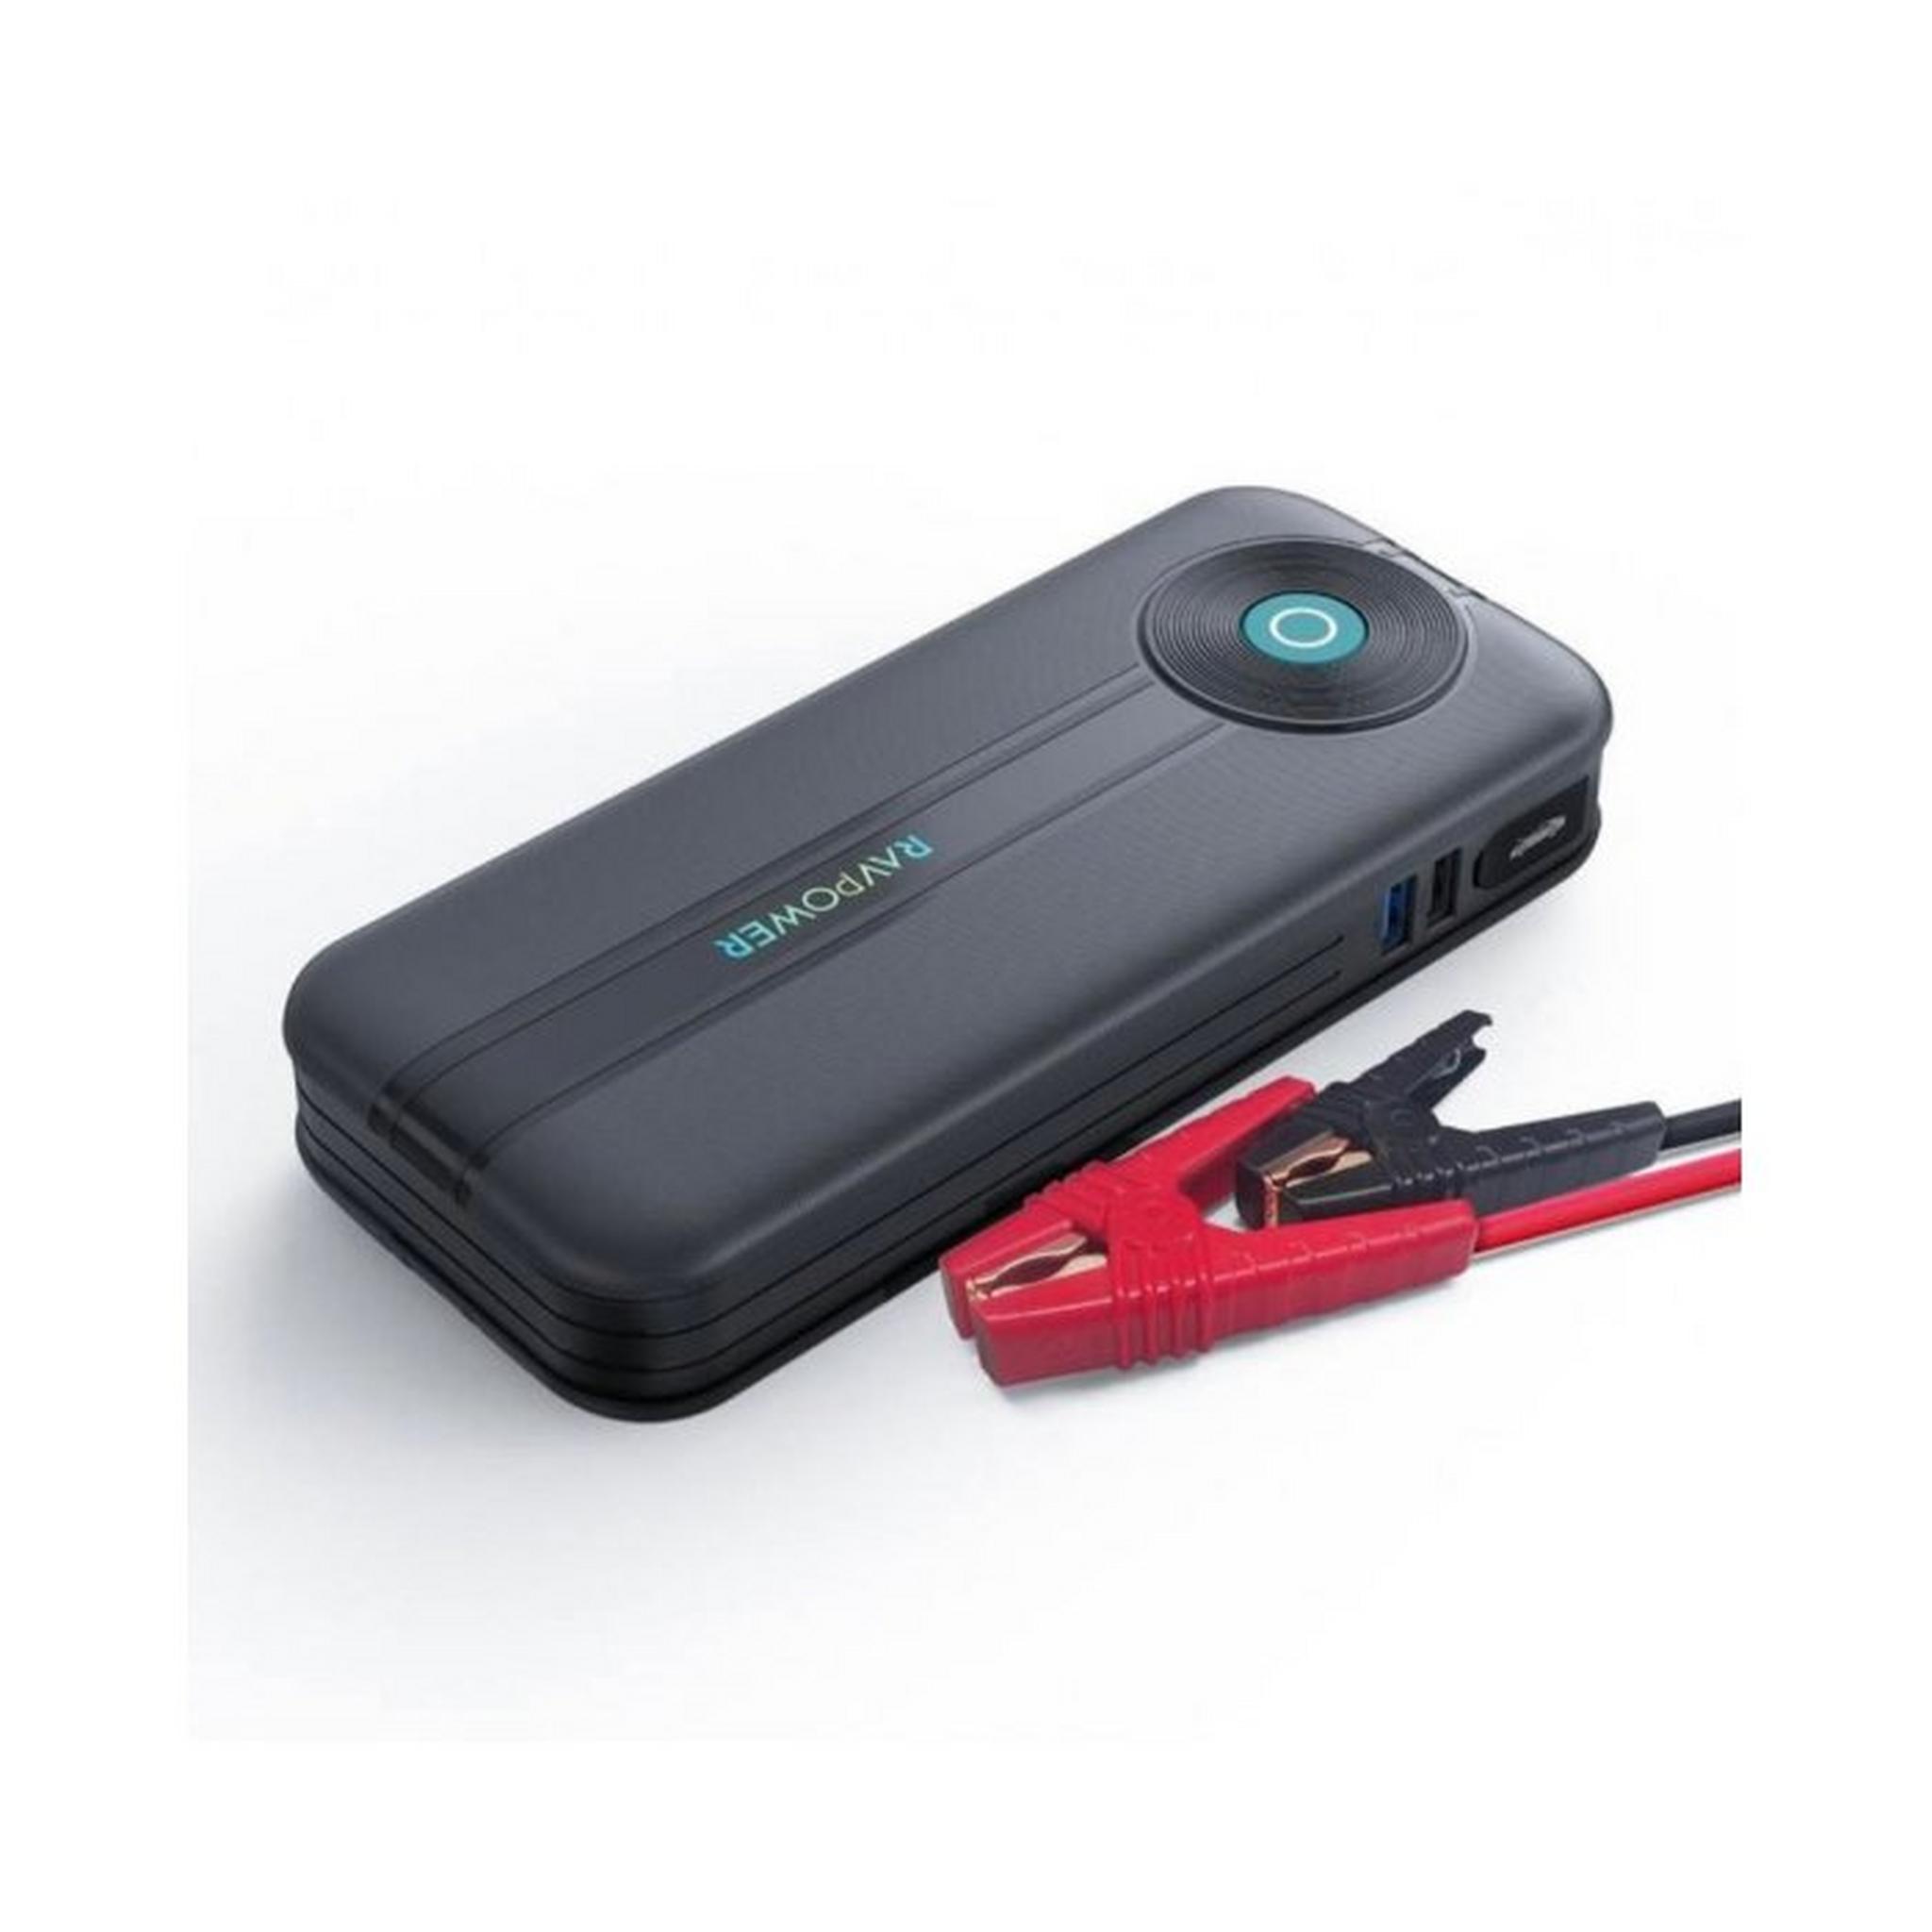 Ravpower Power Bank and Car Jump Starter, 20000mAh and 3000A, RP-PB1208 – Black